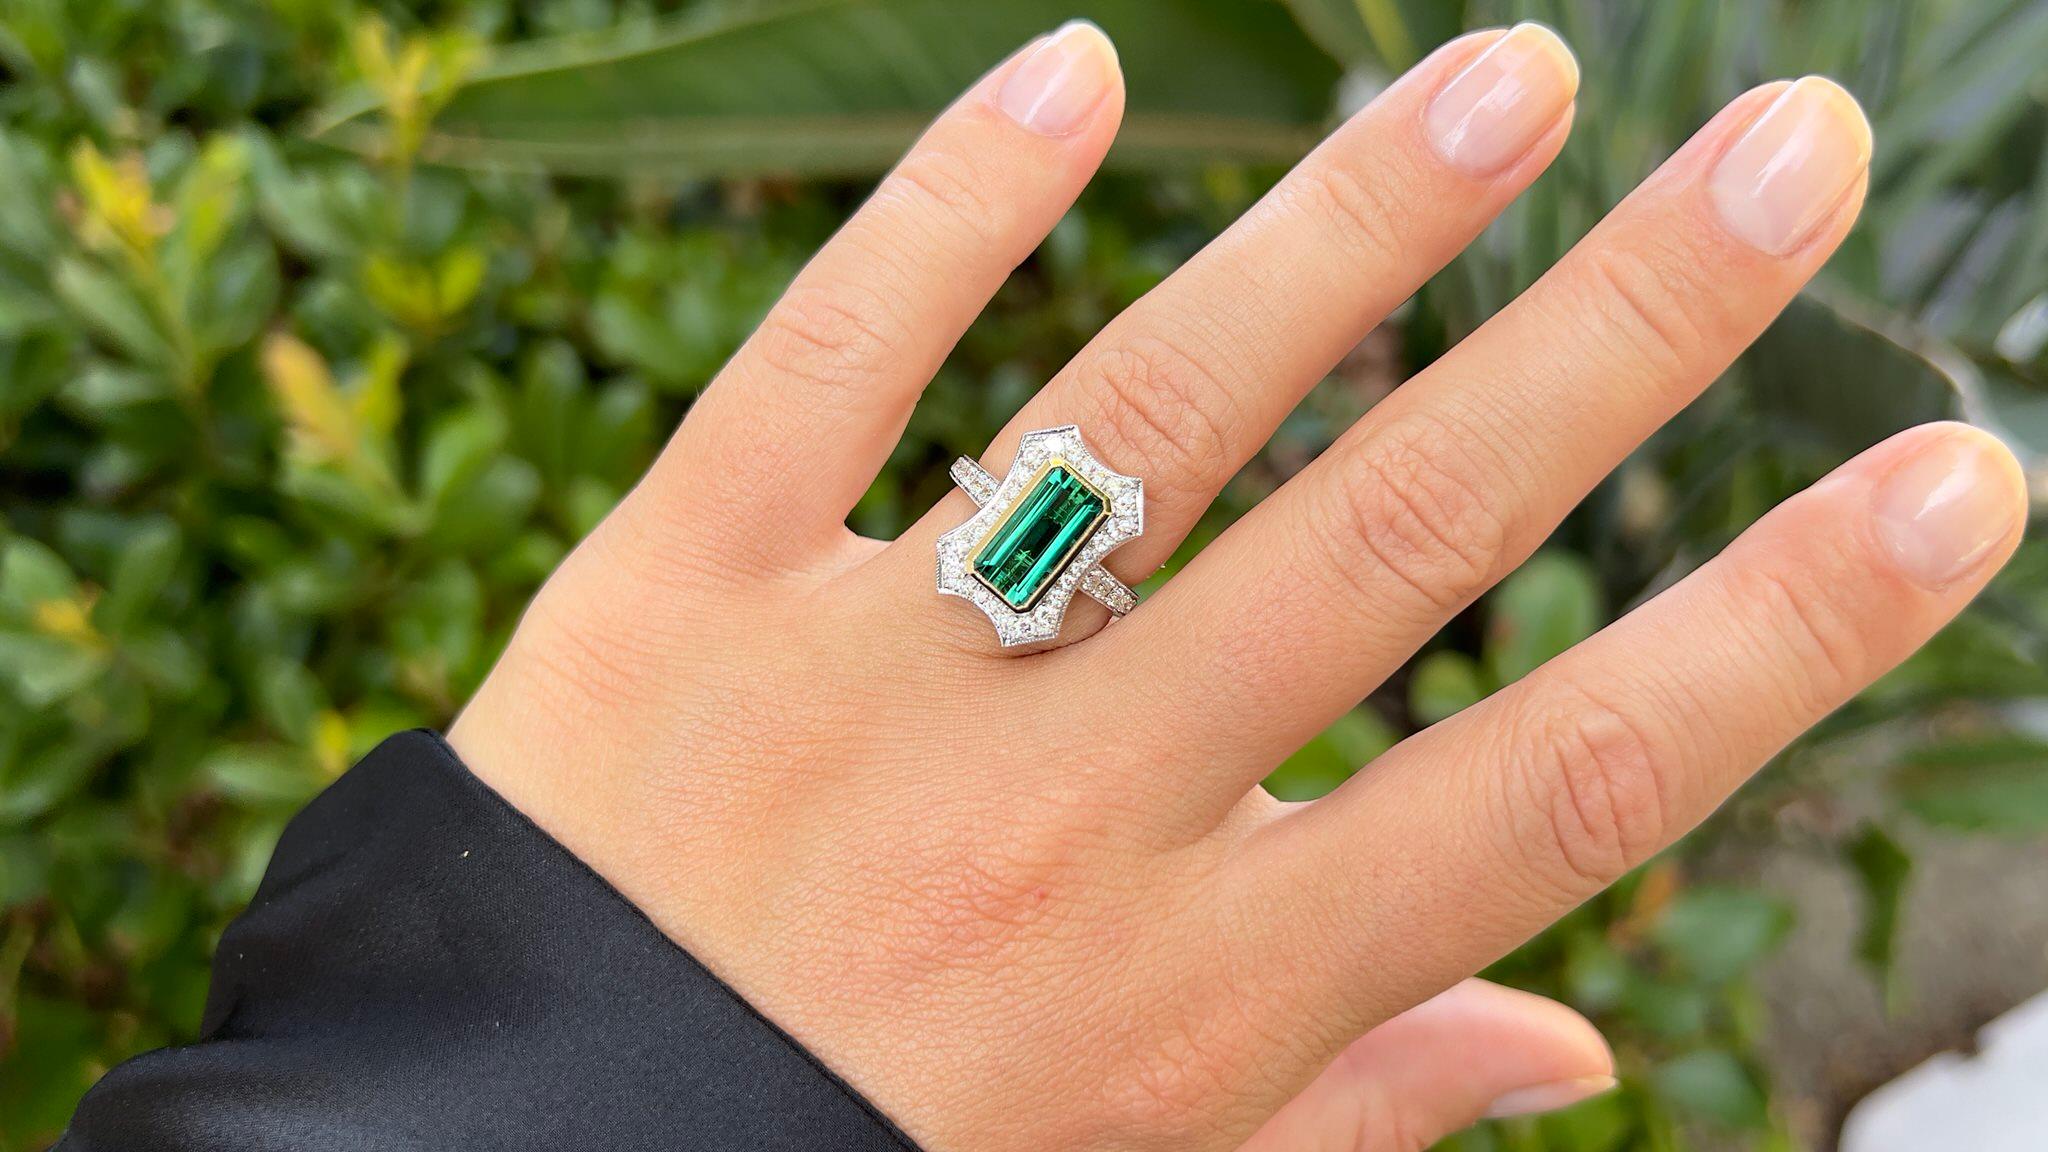 It comes with the Gemological Appraisal by GIA GG/AJP
All Gemstones are Natural
Green Tourmaline = 2.82 Carat
Quality: Exceptional, Clarity: Flawless, Cut: Emerald
38 Diamonds = 0.60 Carats
Cut: Round, Color: F-G, Clarity: VS
Metal: 14K Gold
Ring